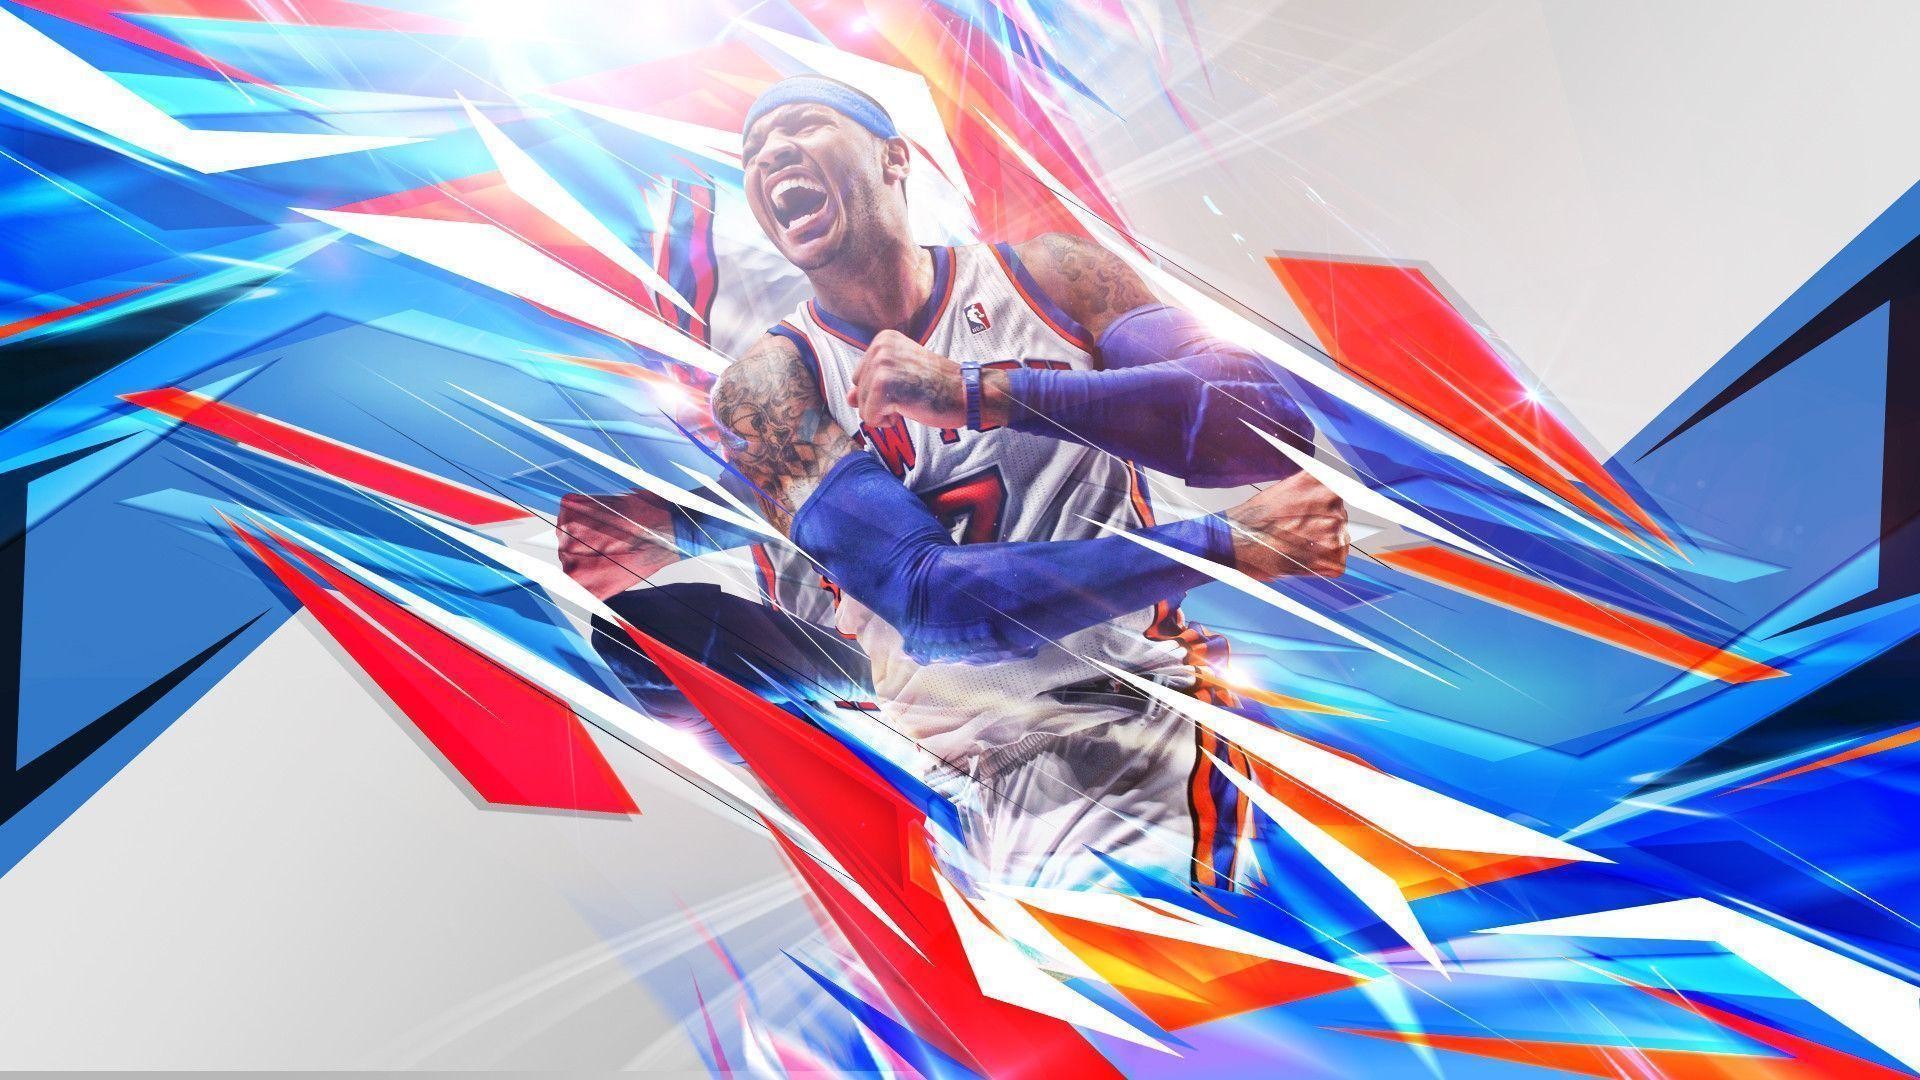 1920x1080 Carmelo Anthony Wallpapers 2015 HD - Wallpaper Cave